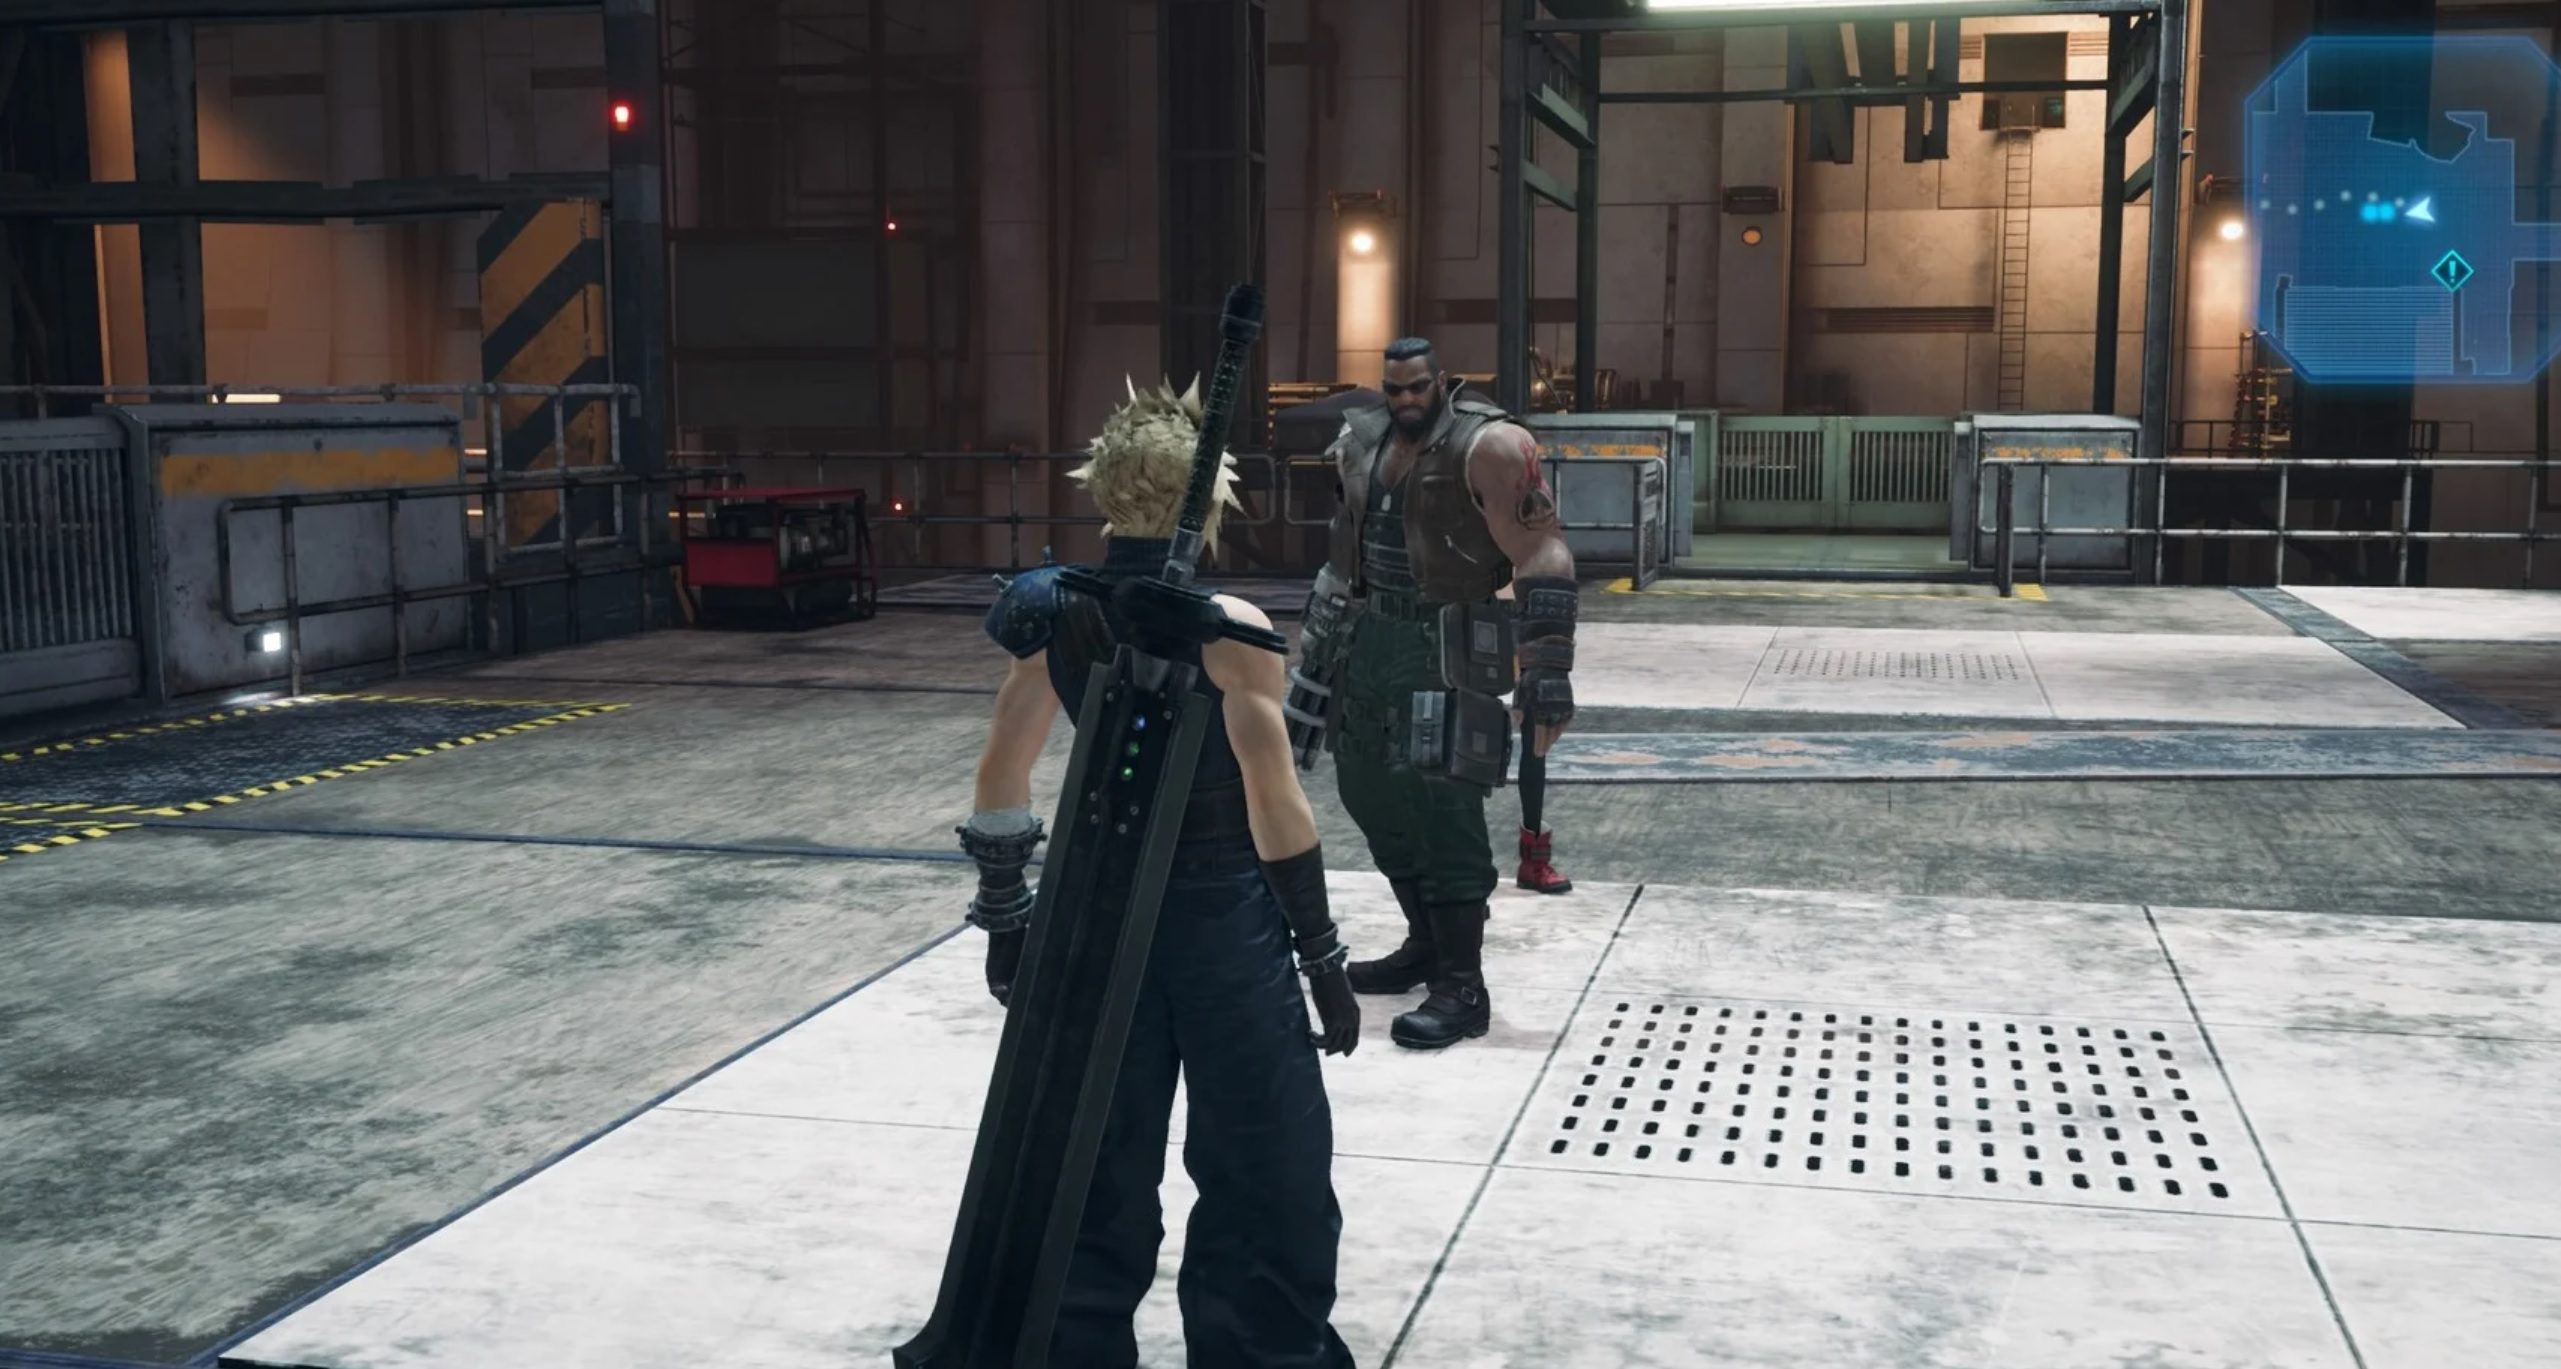 stealing the past ffxv